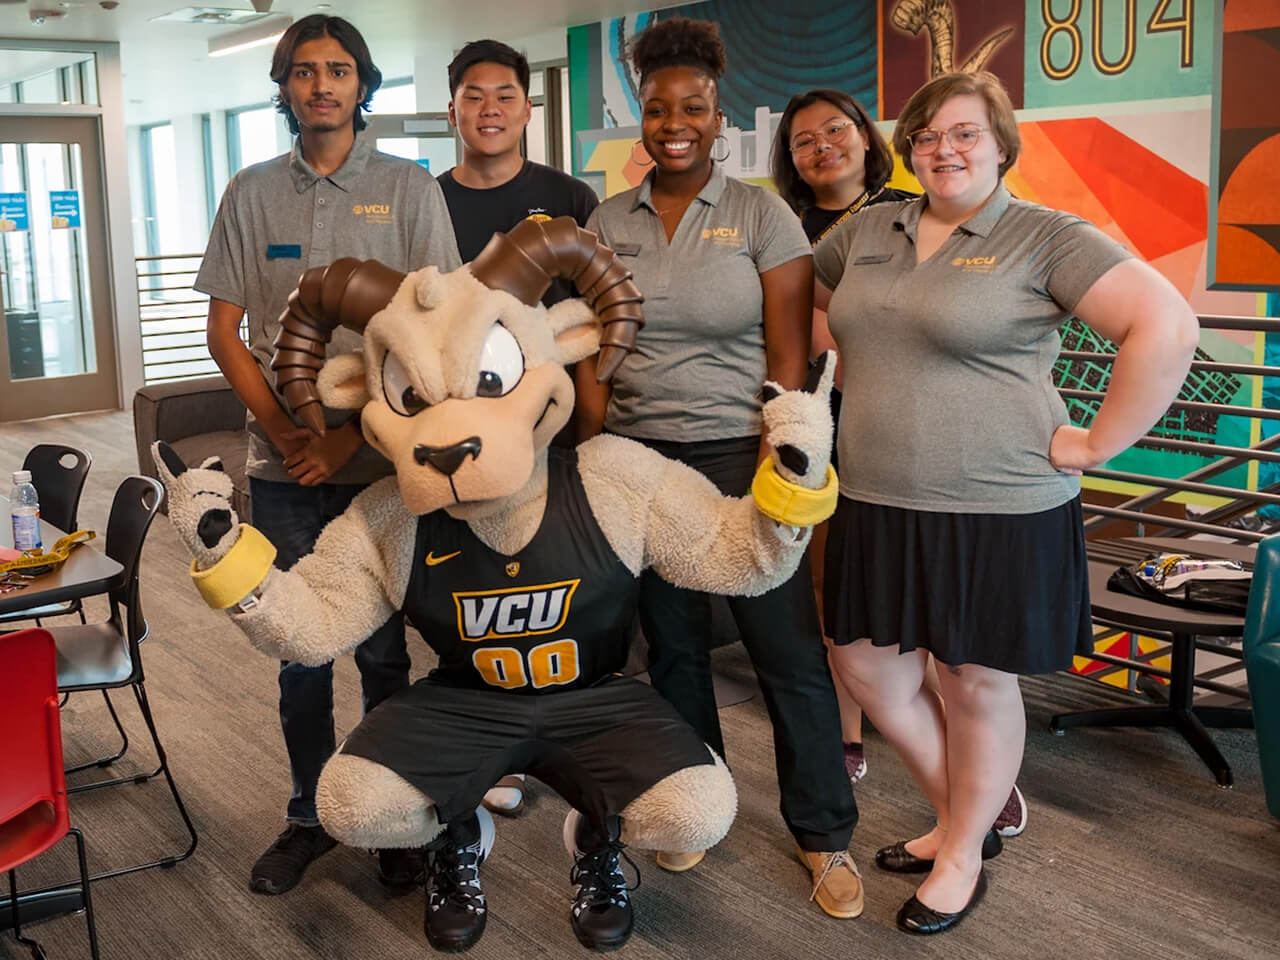 Rodney the Ram posing with a group of volunteers